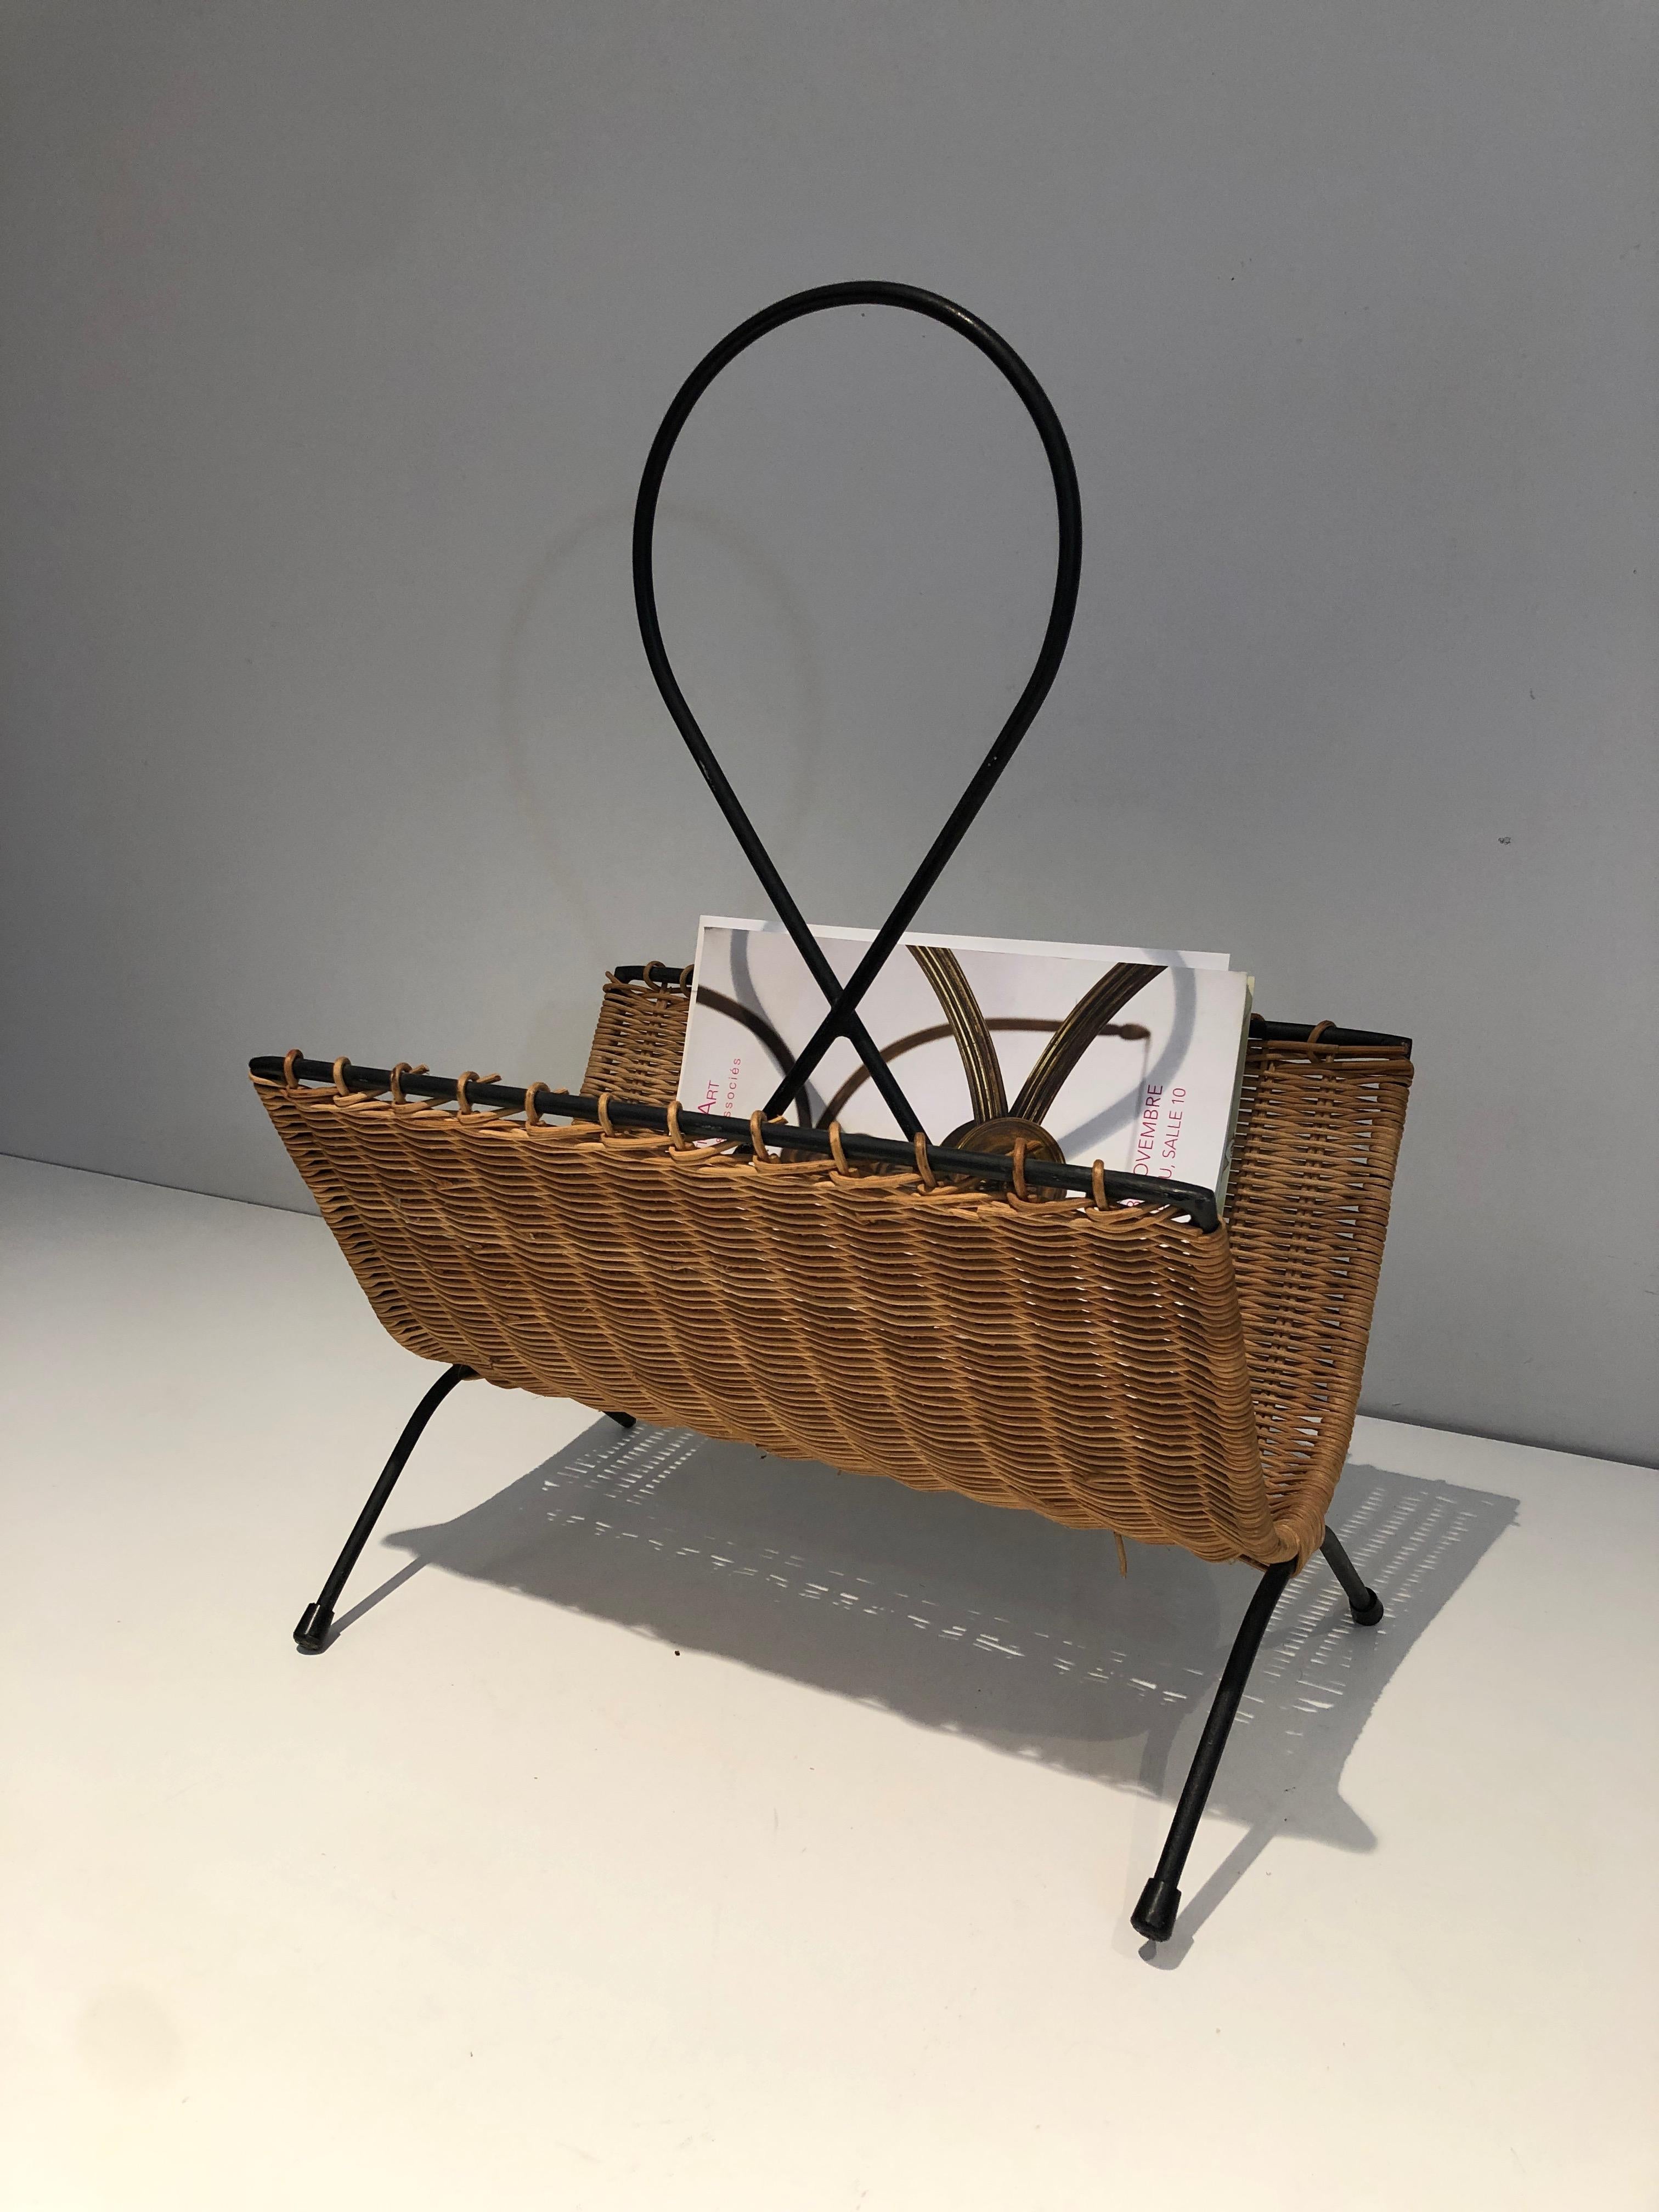 Black Lacquered Metal Magazine Rack, French Work, Circa 1950 For Sale 6